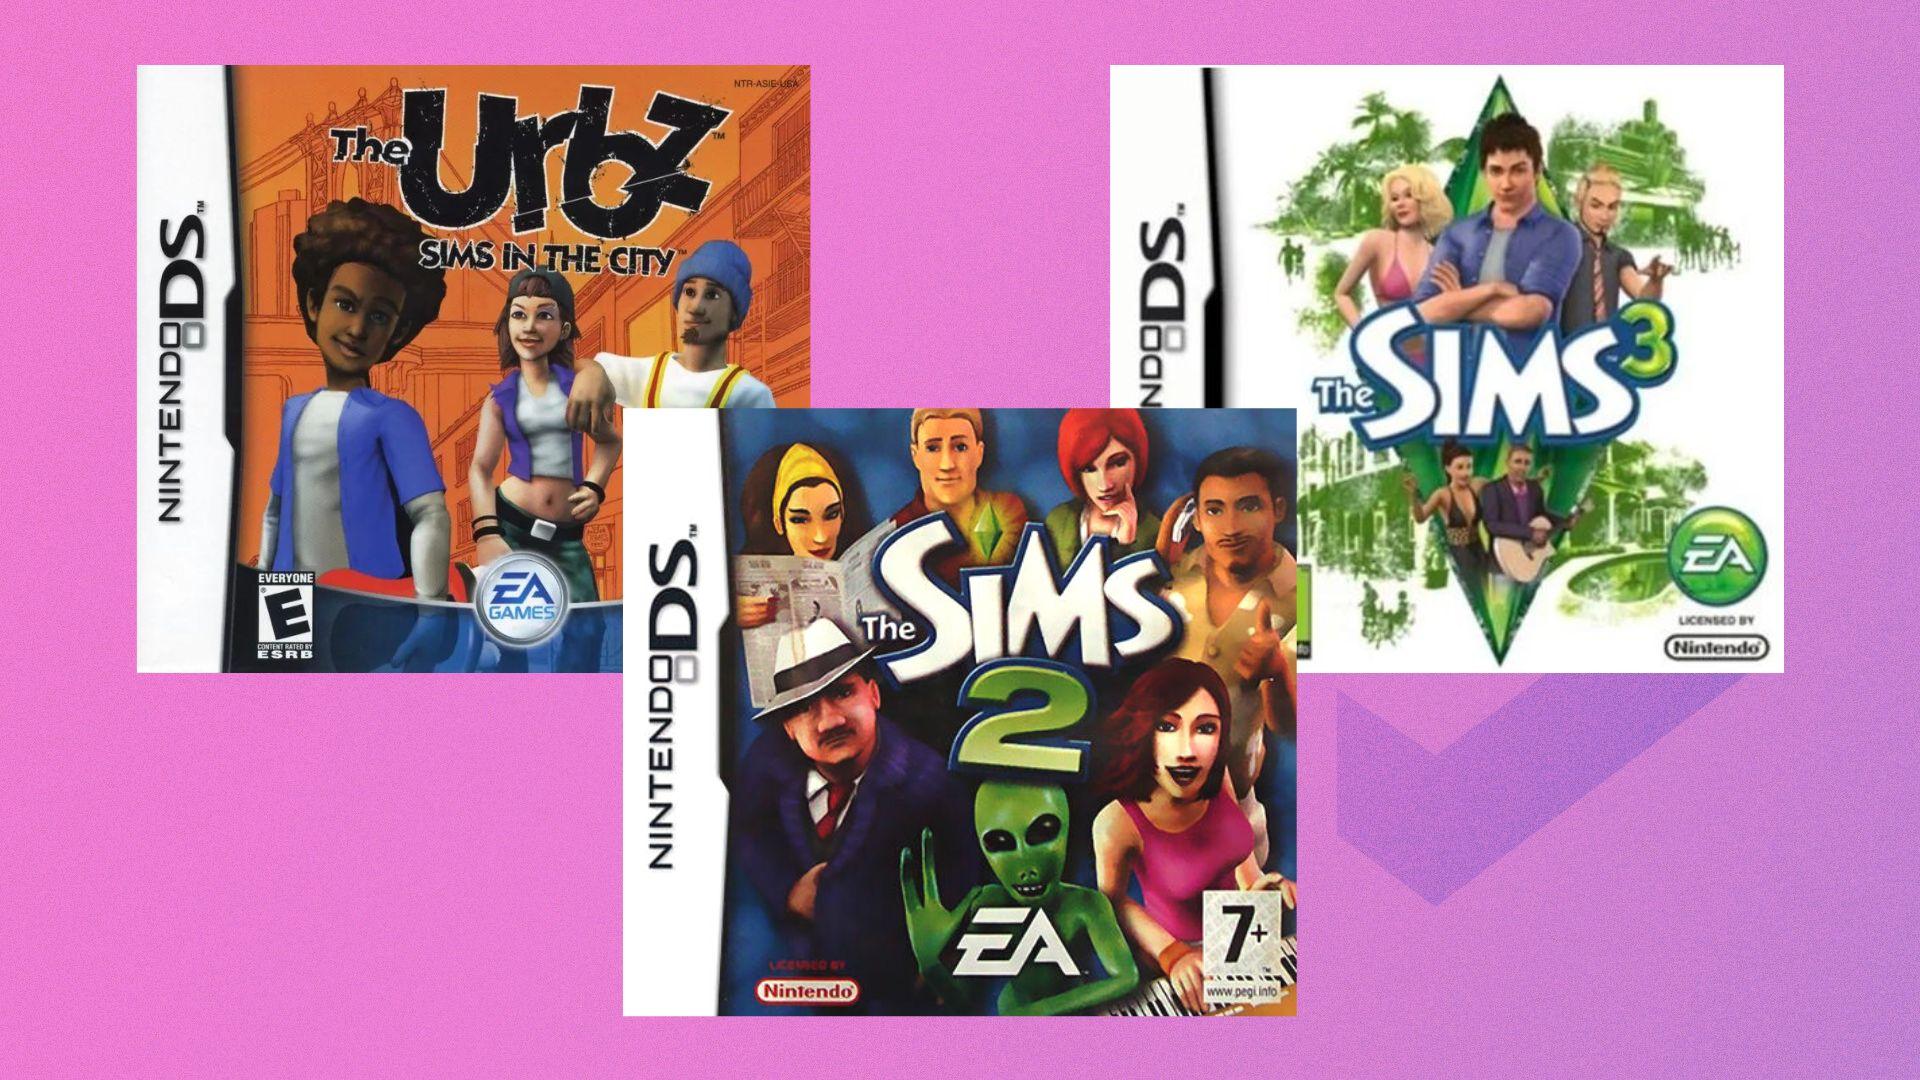 Will we ever get a Sims Nintendo Switch version?